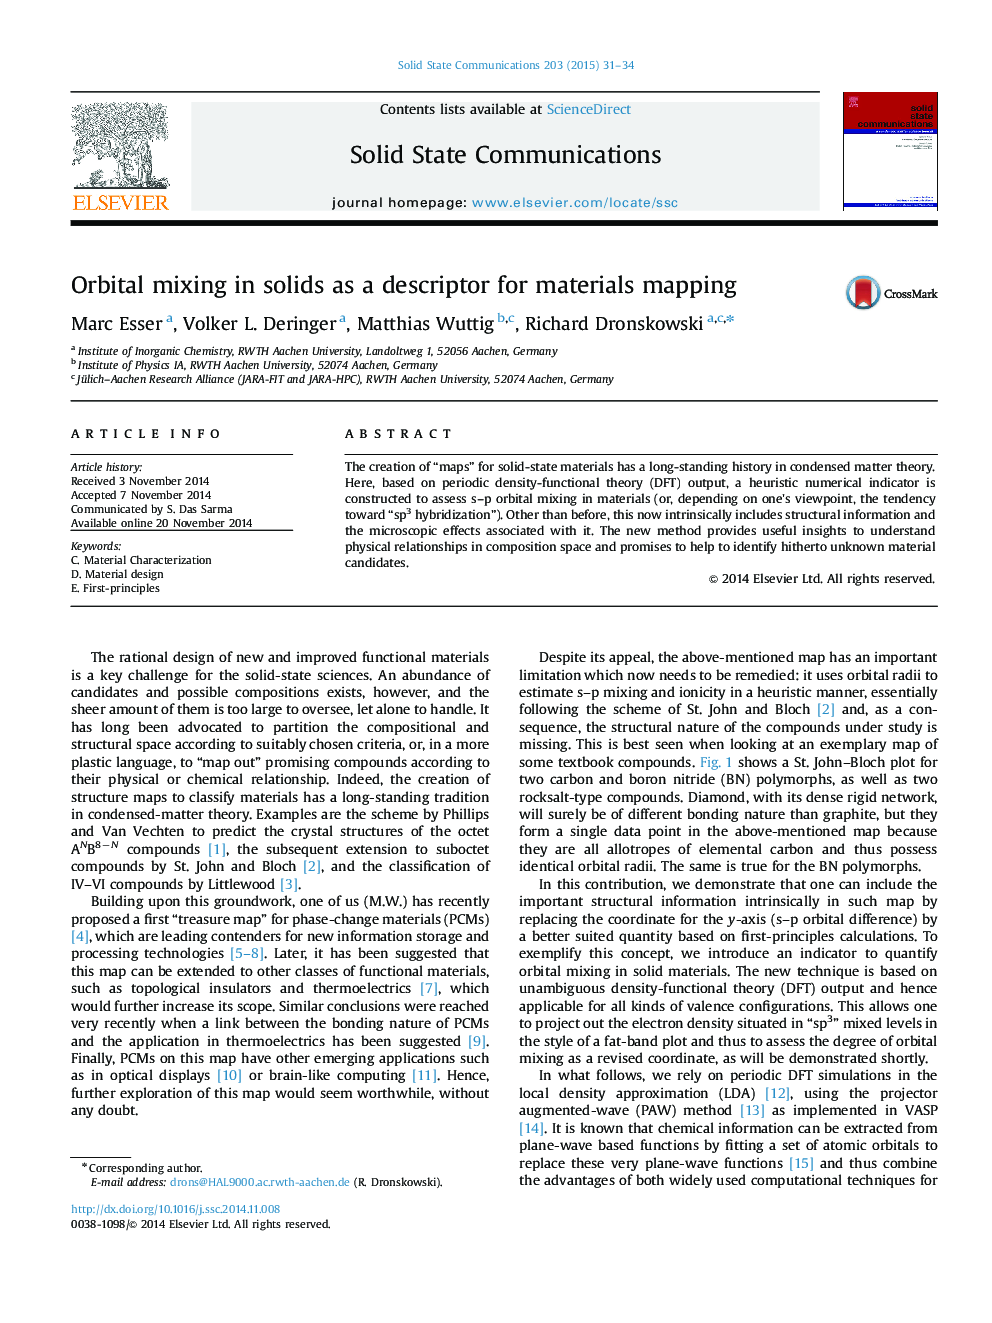 Orbital mixing in solids as a descriptor for materials mapping